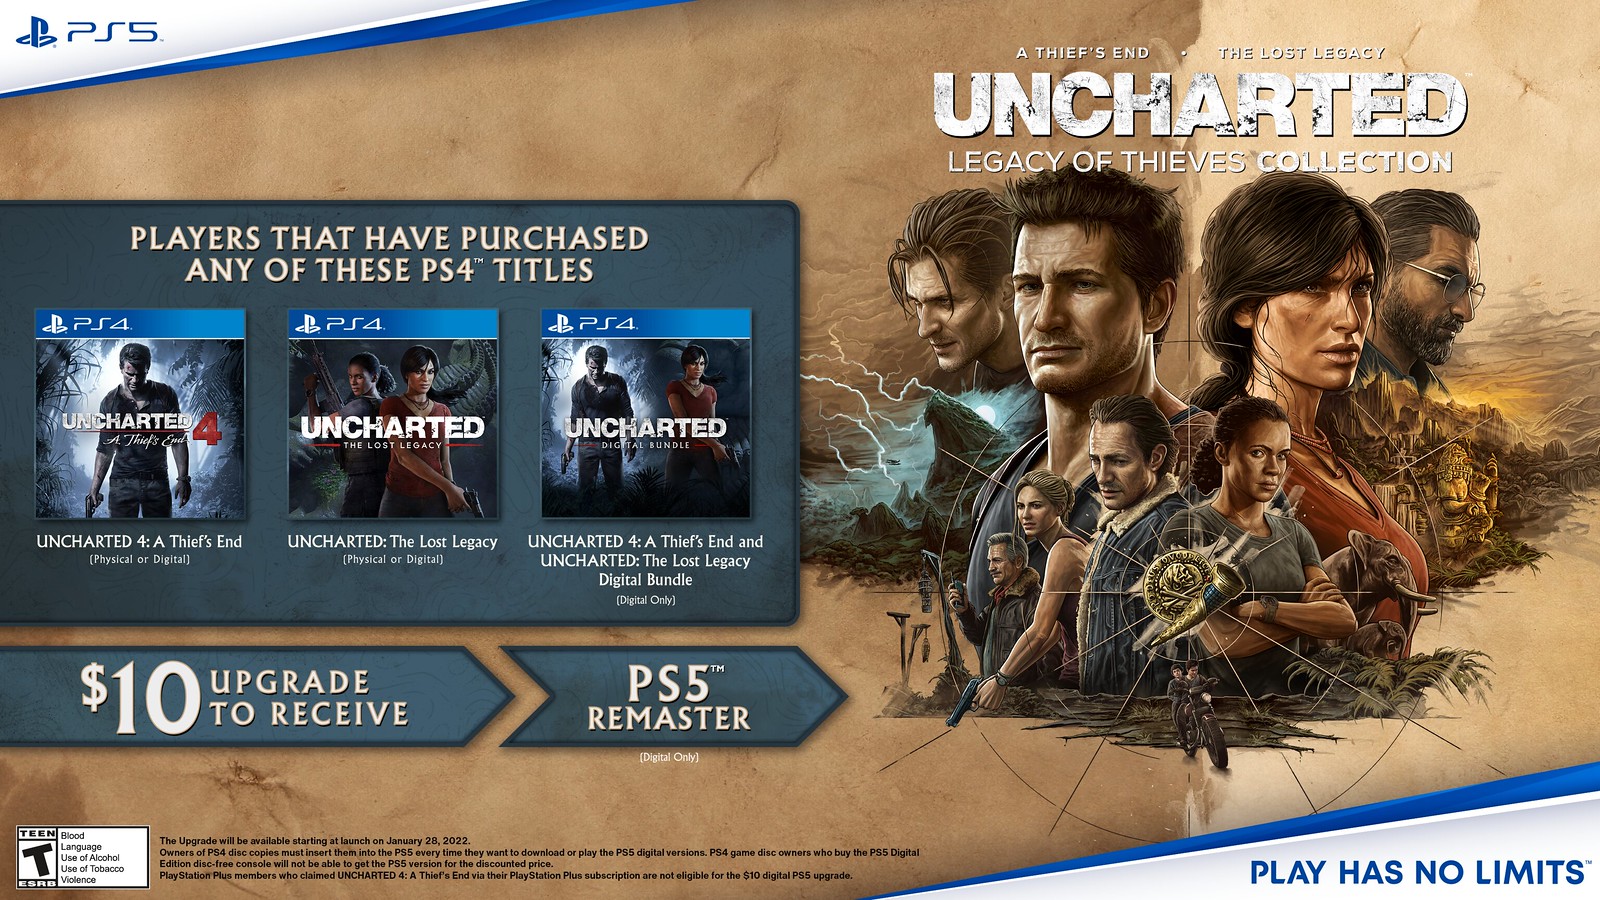 Uncharted: Legacy of Thieves Collection on PS5 and PC confirmed for 2022